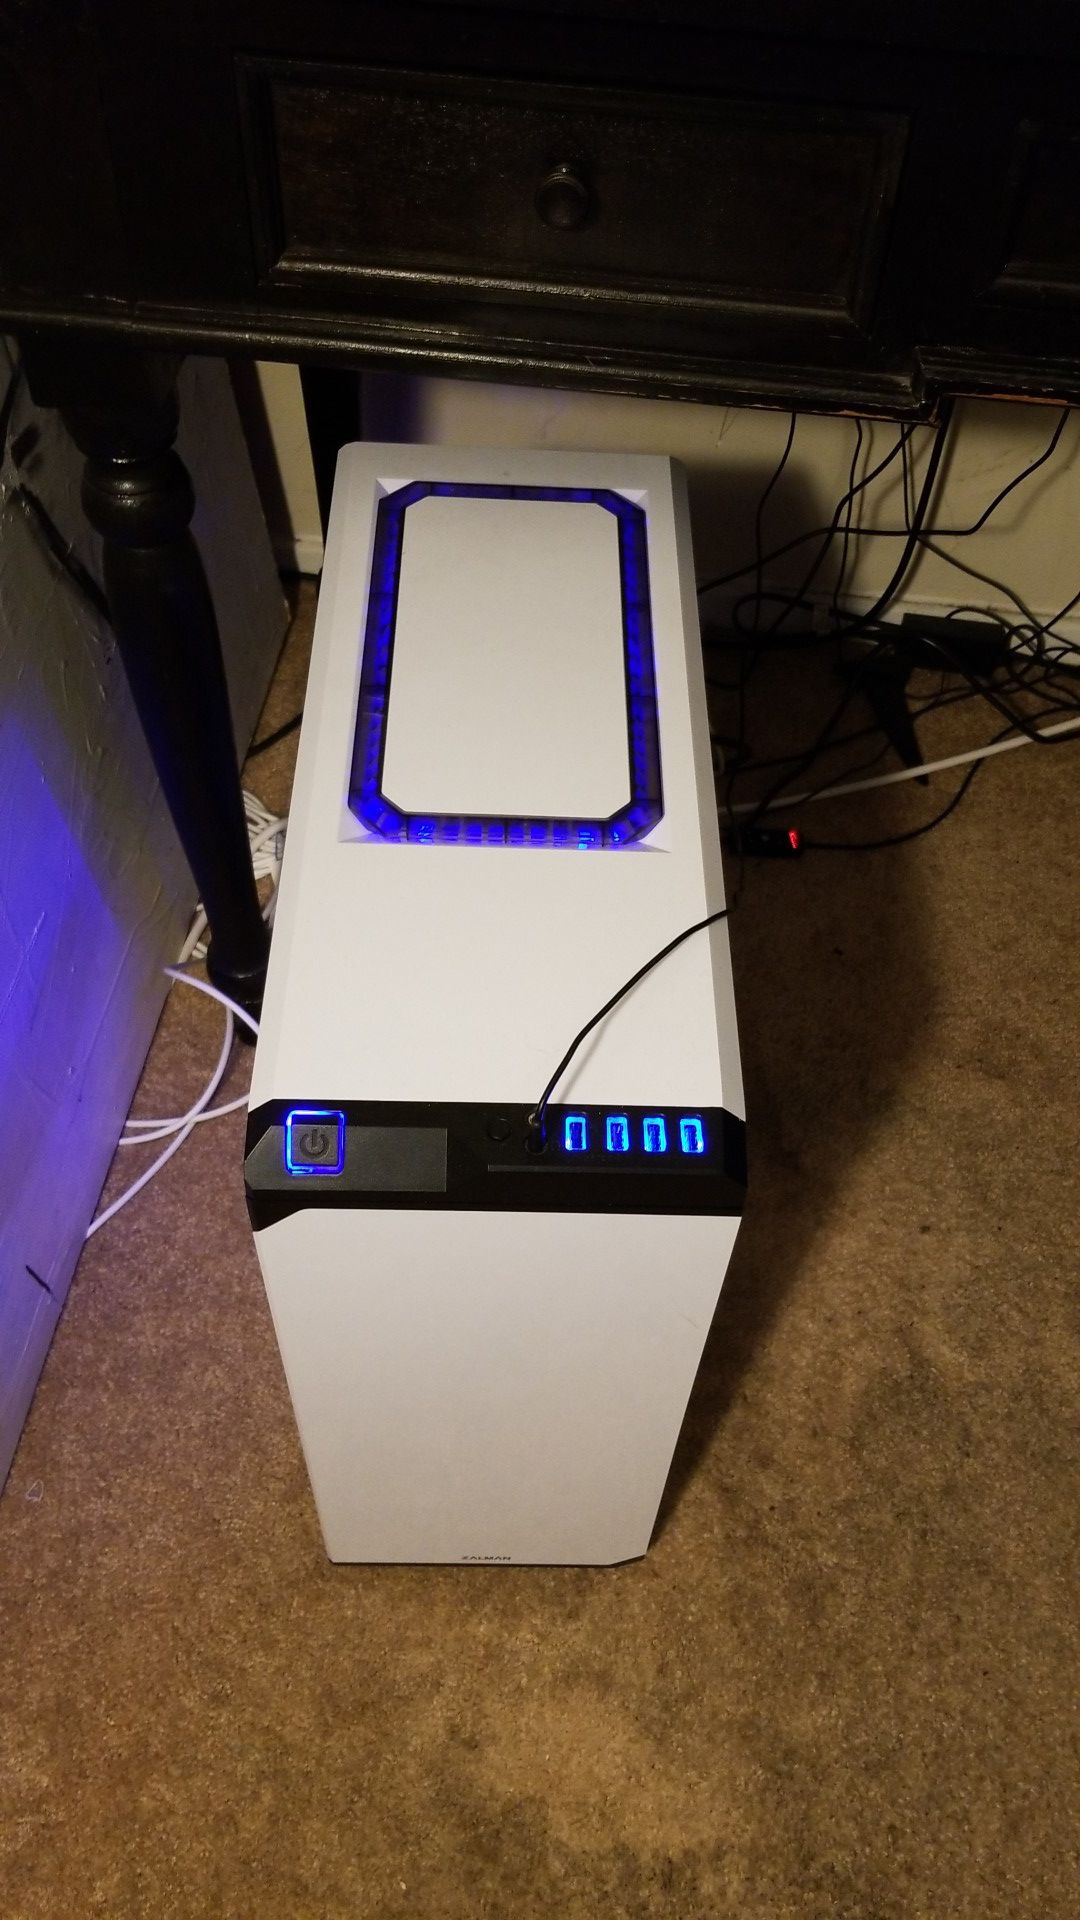 Gaming Desktop Computer (with optional keyboard and monitor)